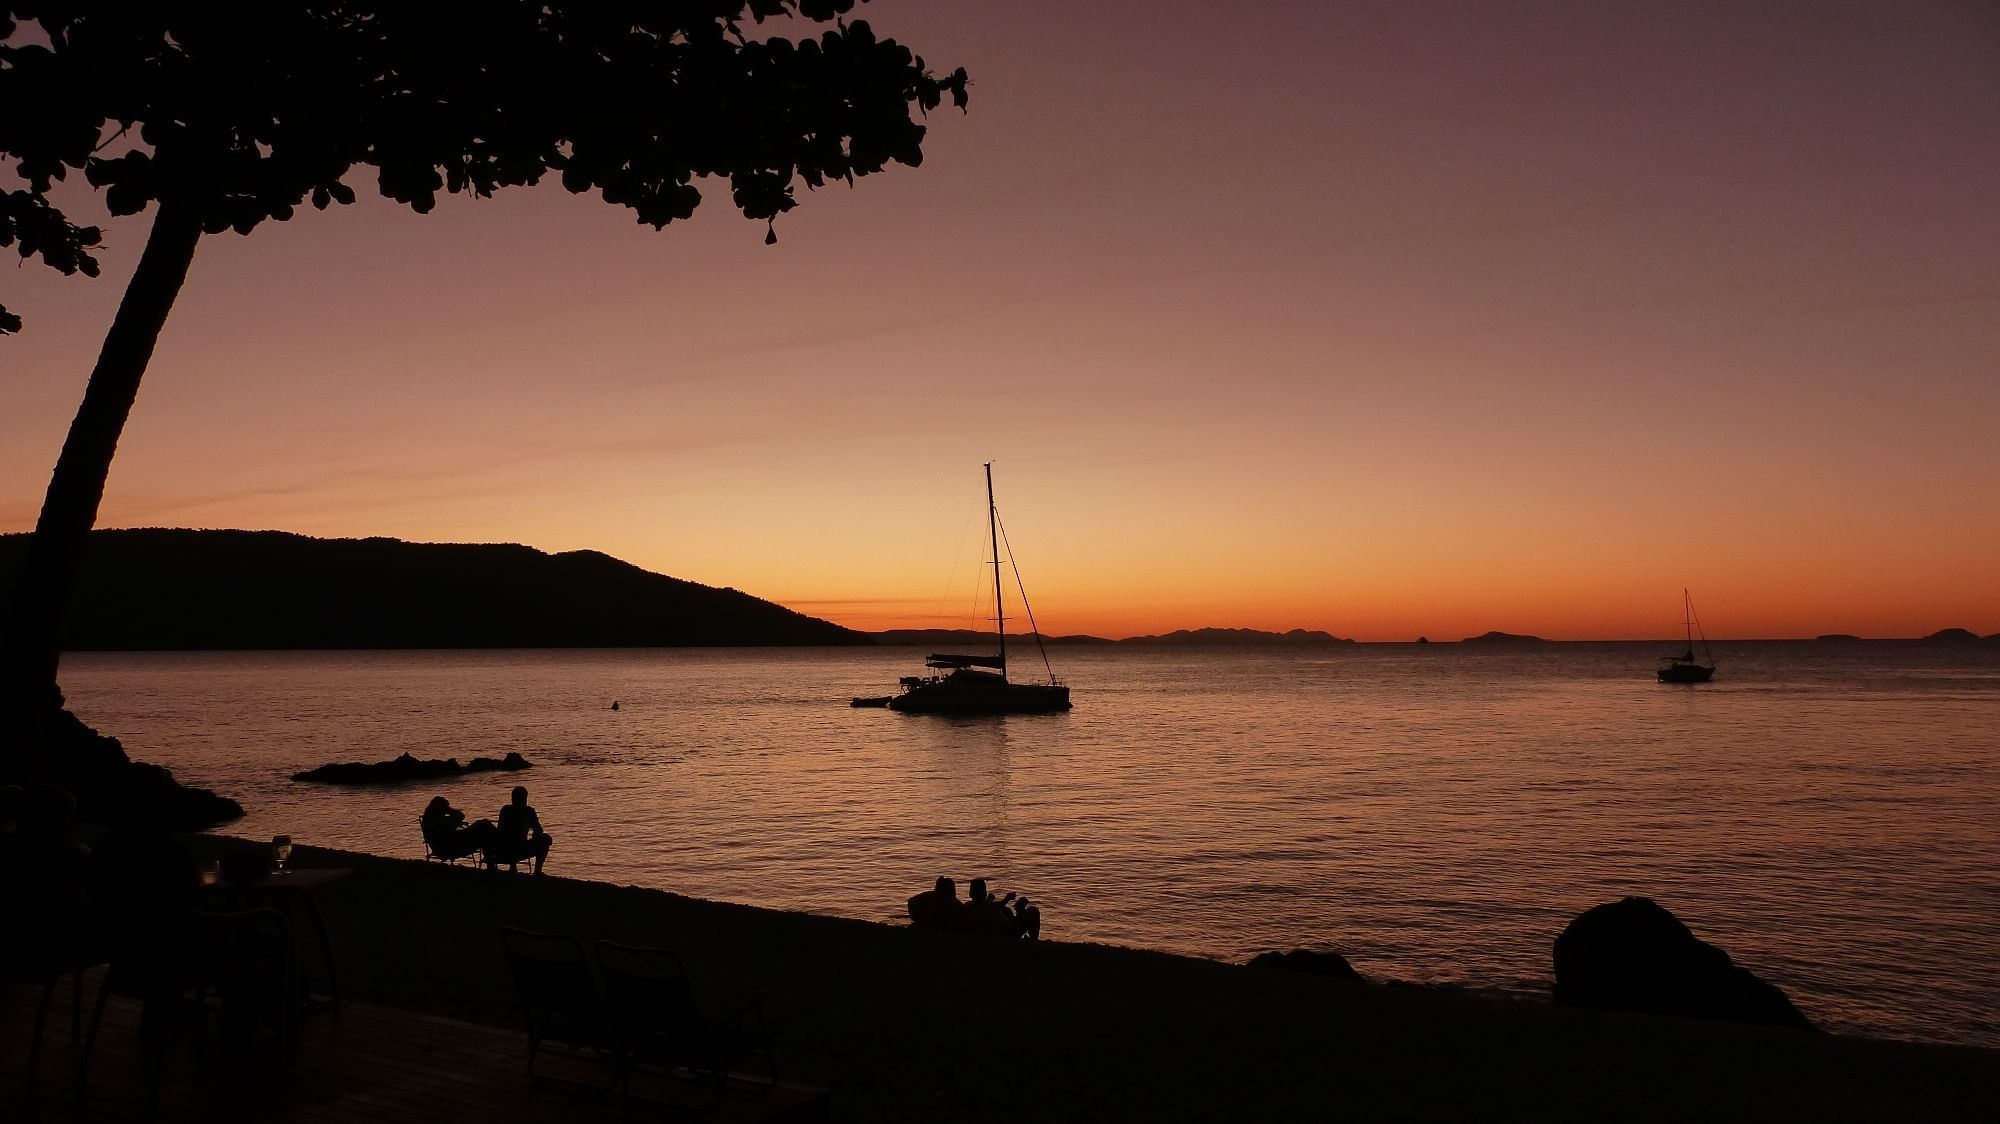 Evening view of a yacht on the sea near Daydream Island Resort